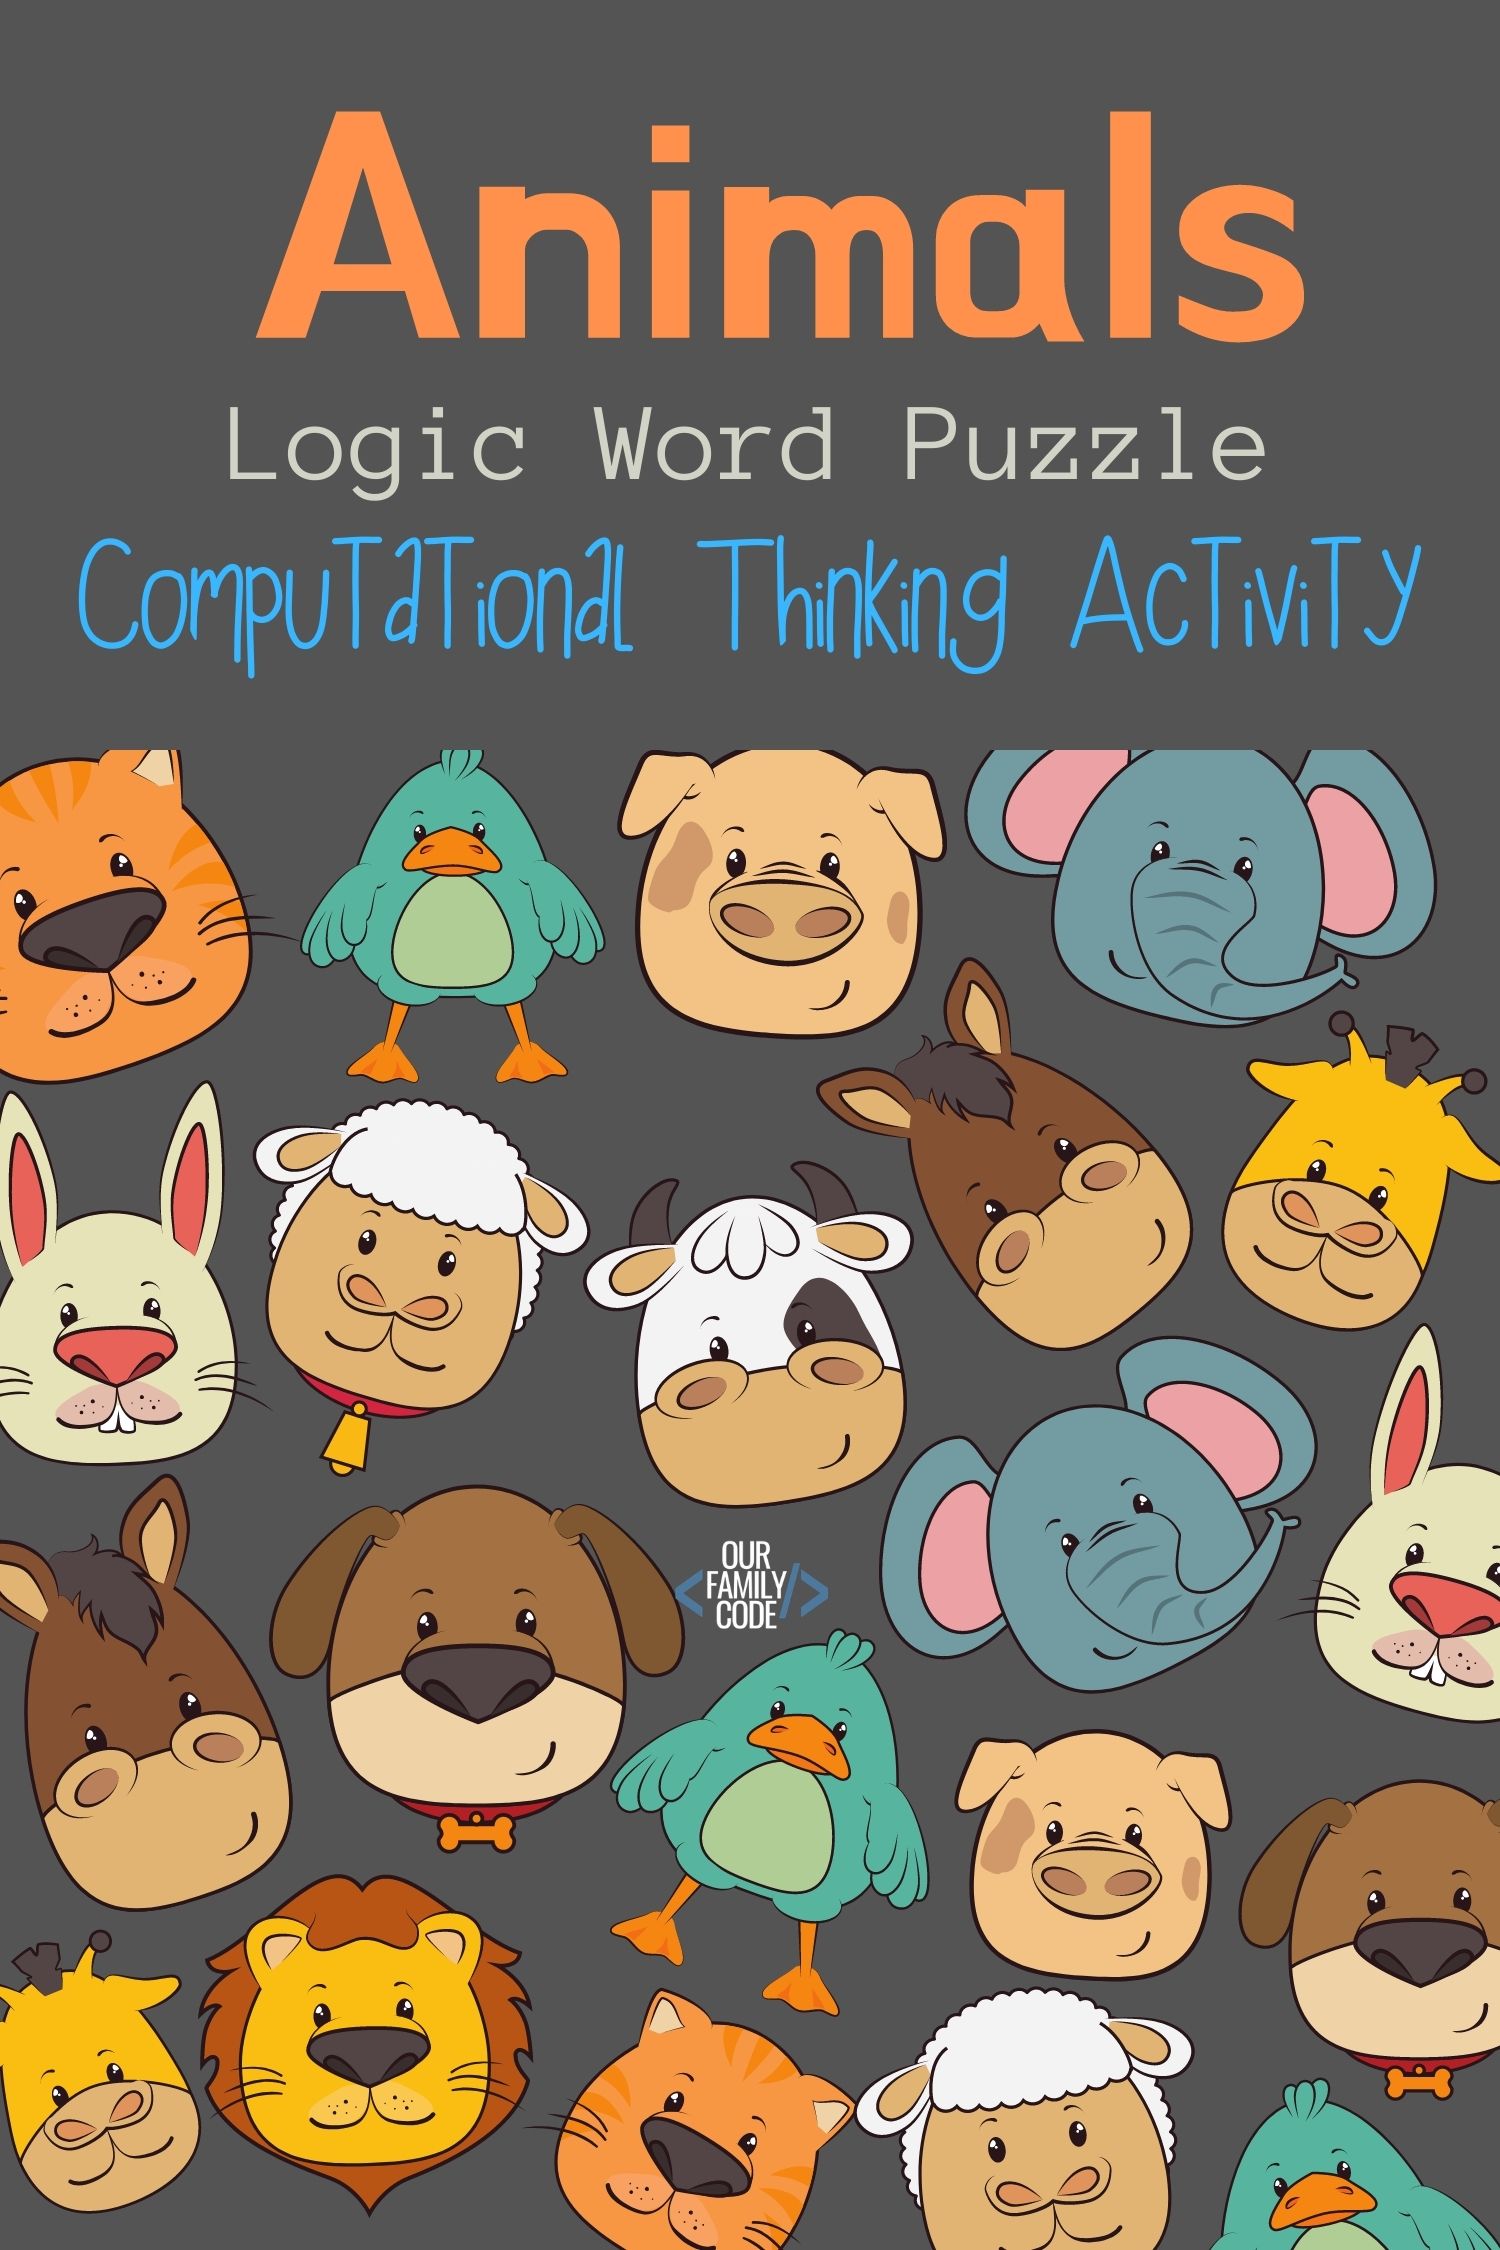 This animals logic word puzzle activity is a way for kids to use logical thinking and pattern matching paired with spatial recognition and spelling. #teachkidstocode #logicpuzzles